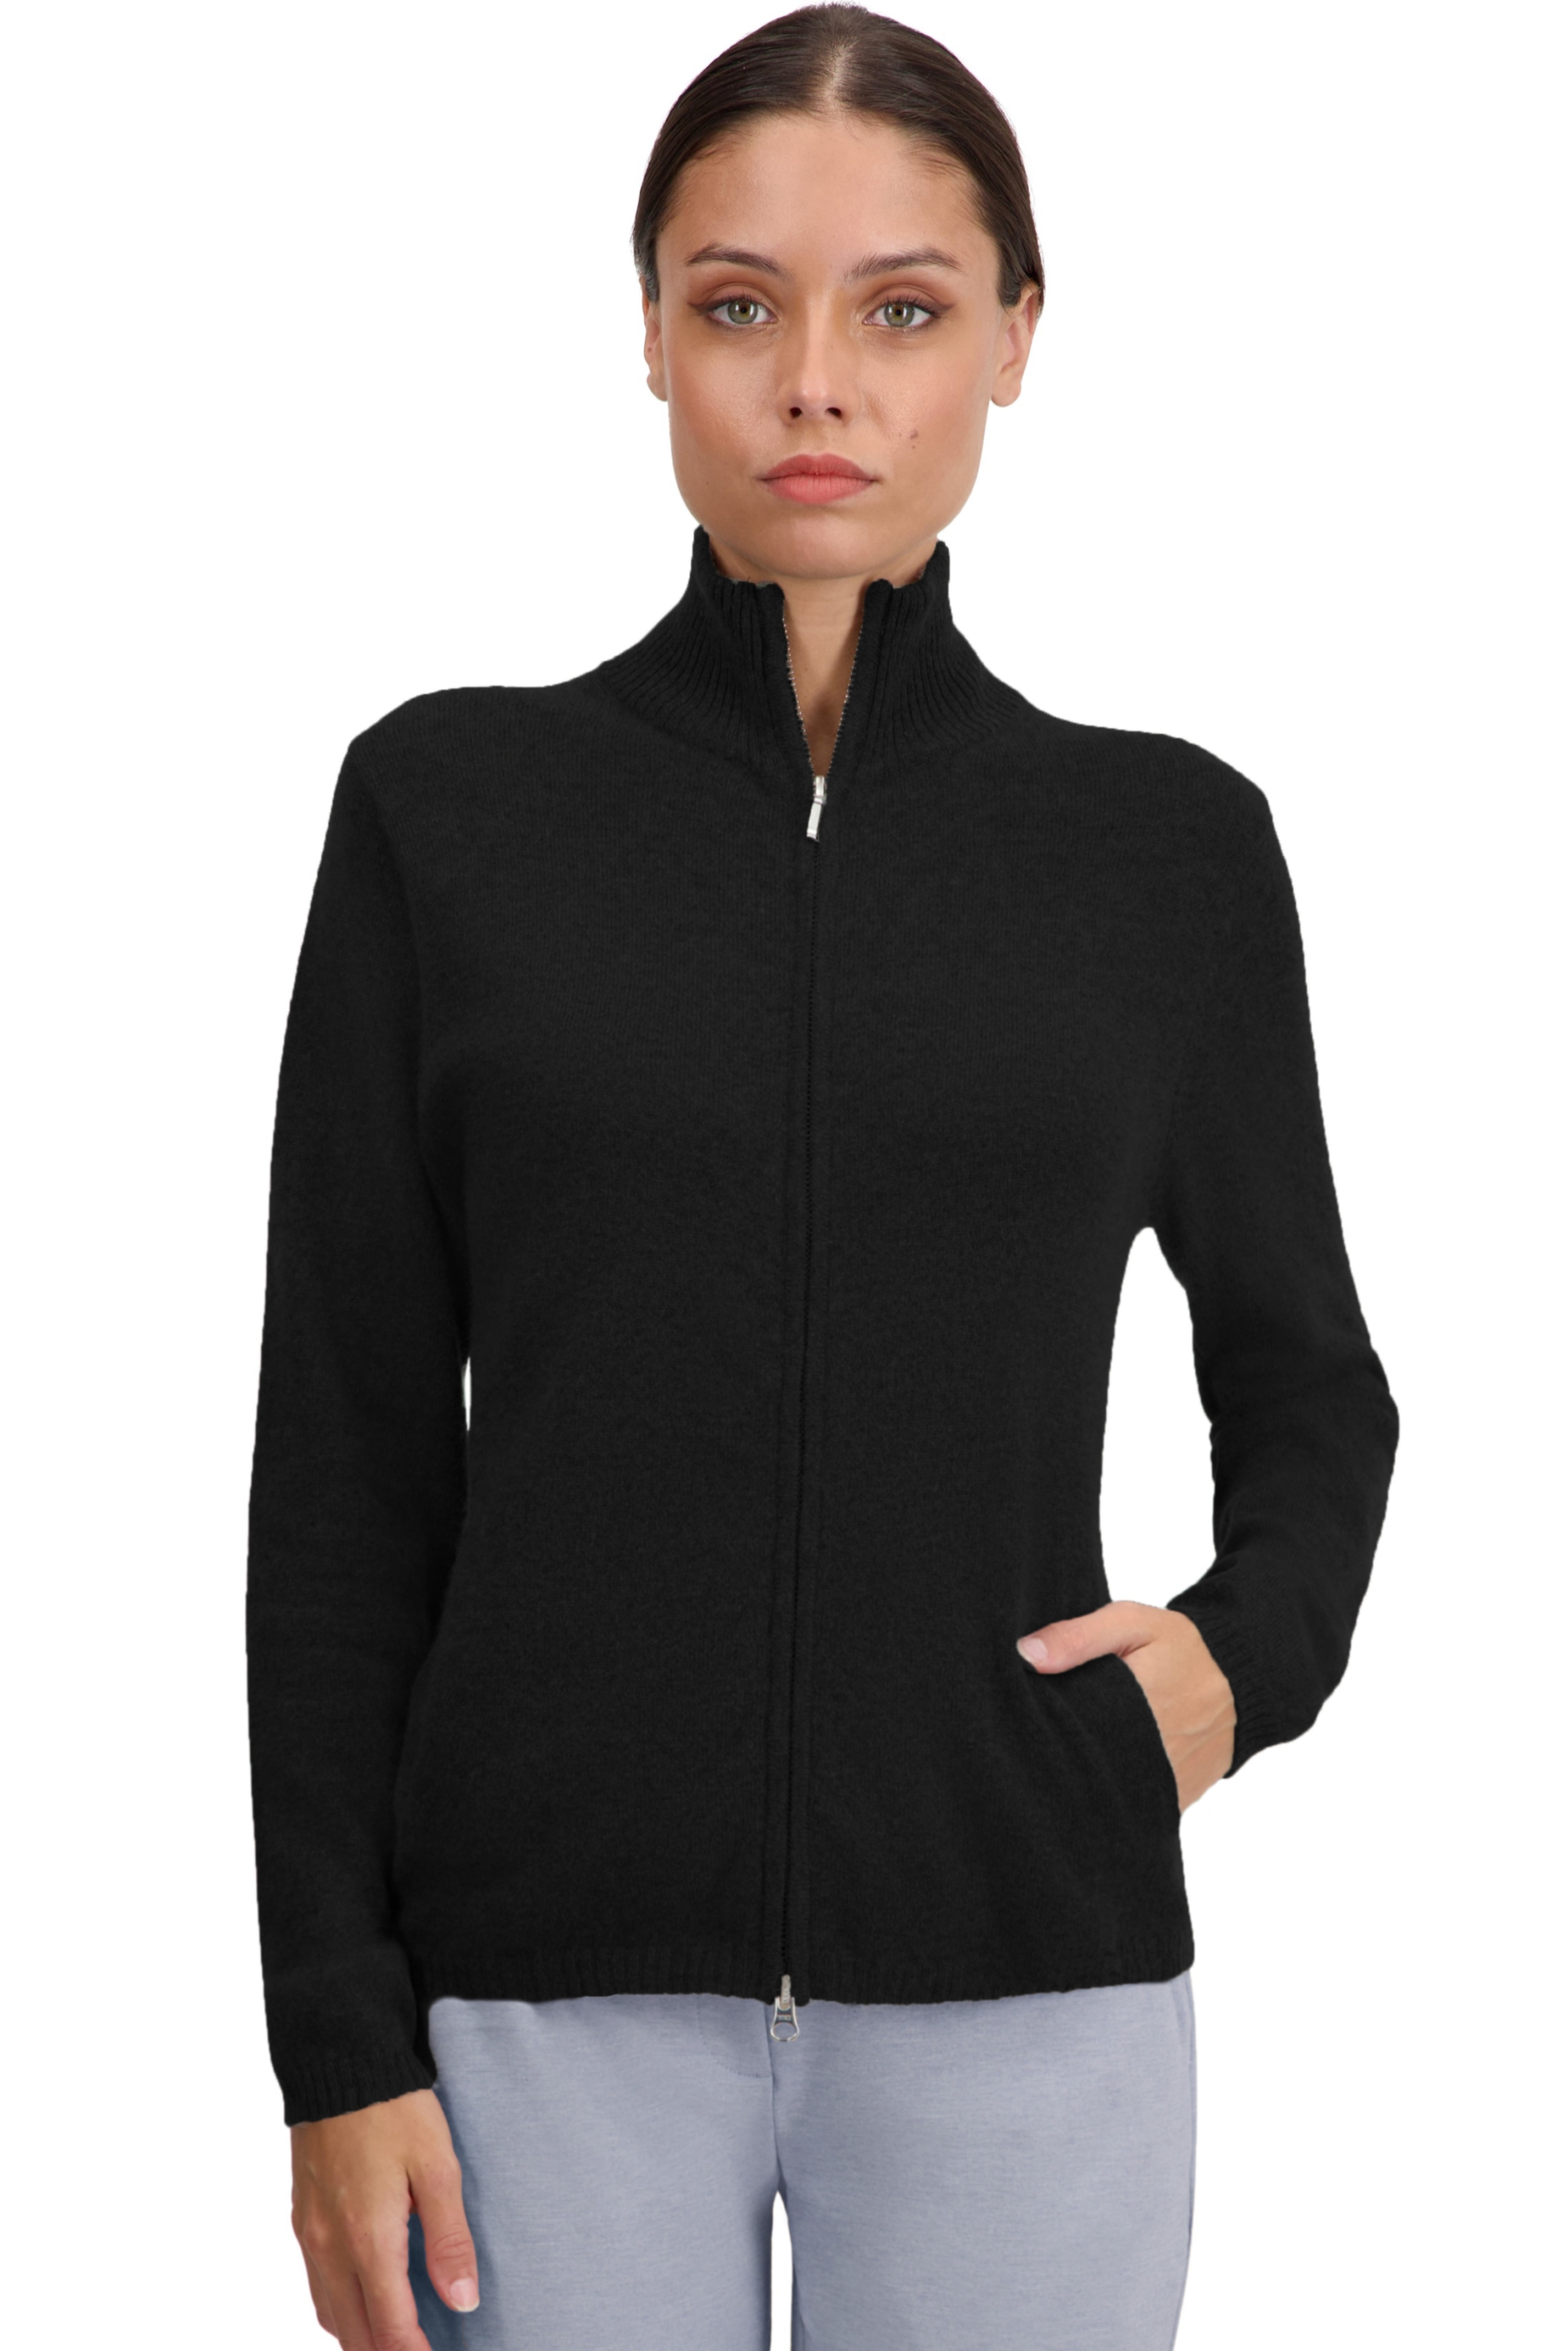 Cashmere ladies basic sweaters at low prices thames first black m